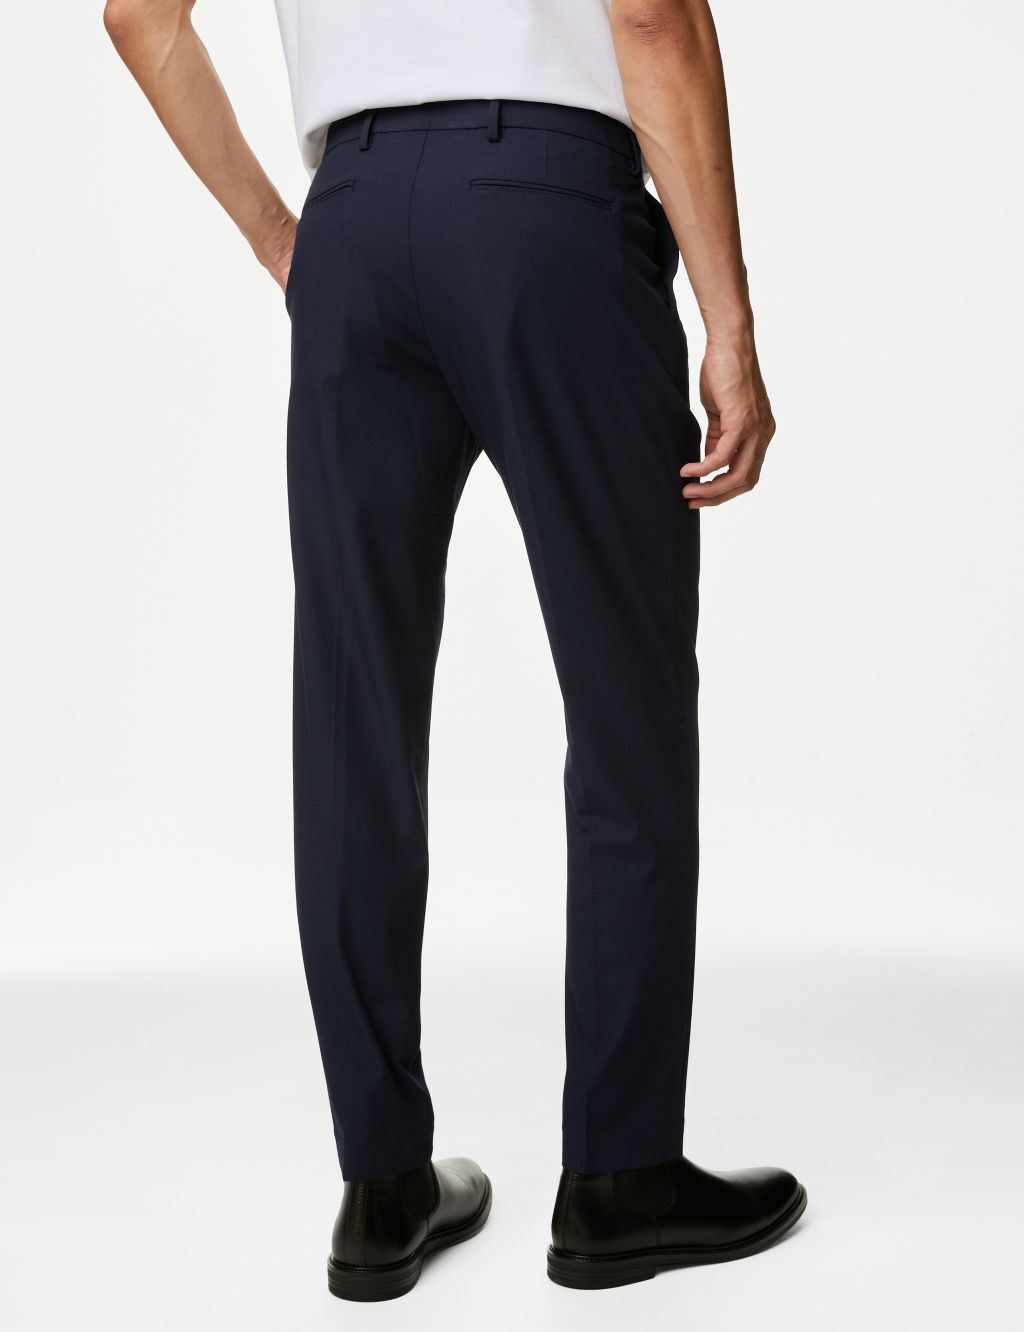 Twin Pleat Stretch Trousers image 5